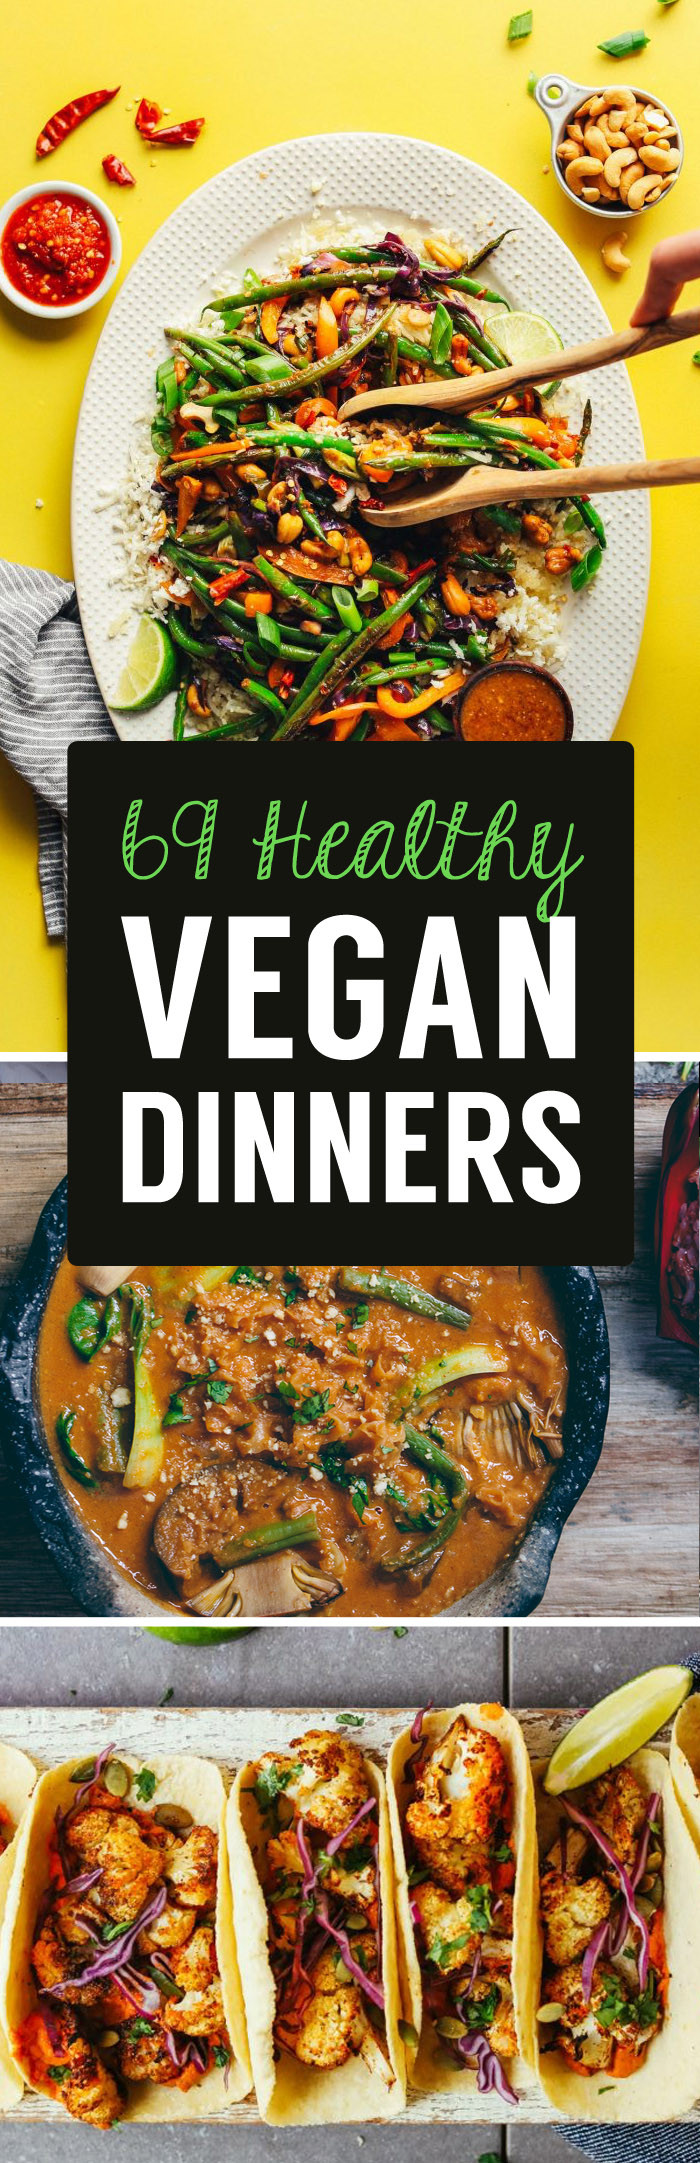 Healthy Vegan Recipes For Weight Loss
 69 Delicious Vegan Recipes That Will Help You Lose Weight